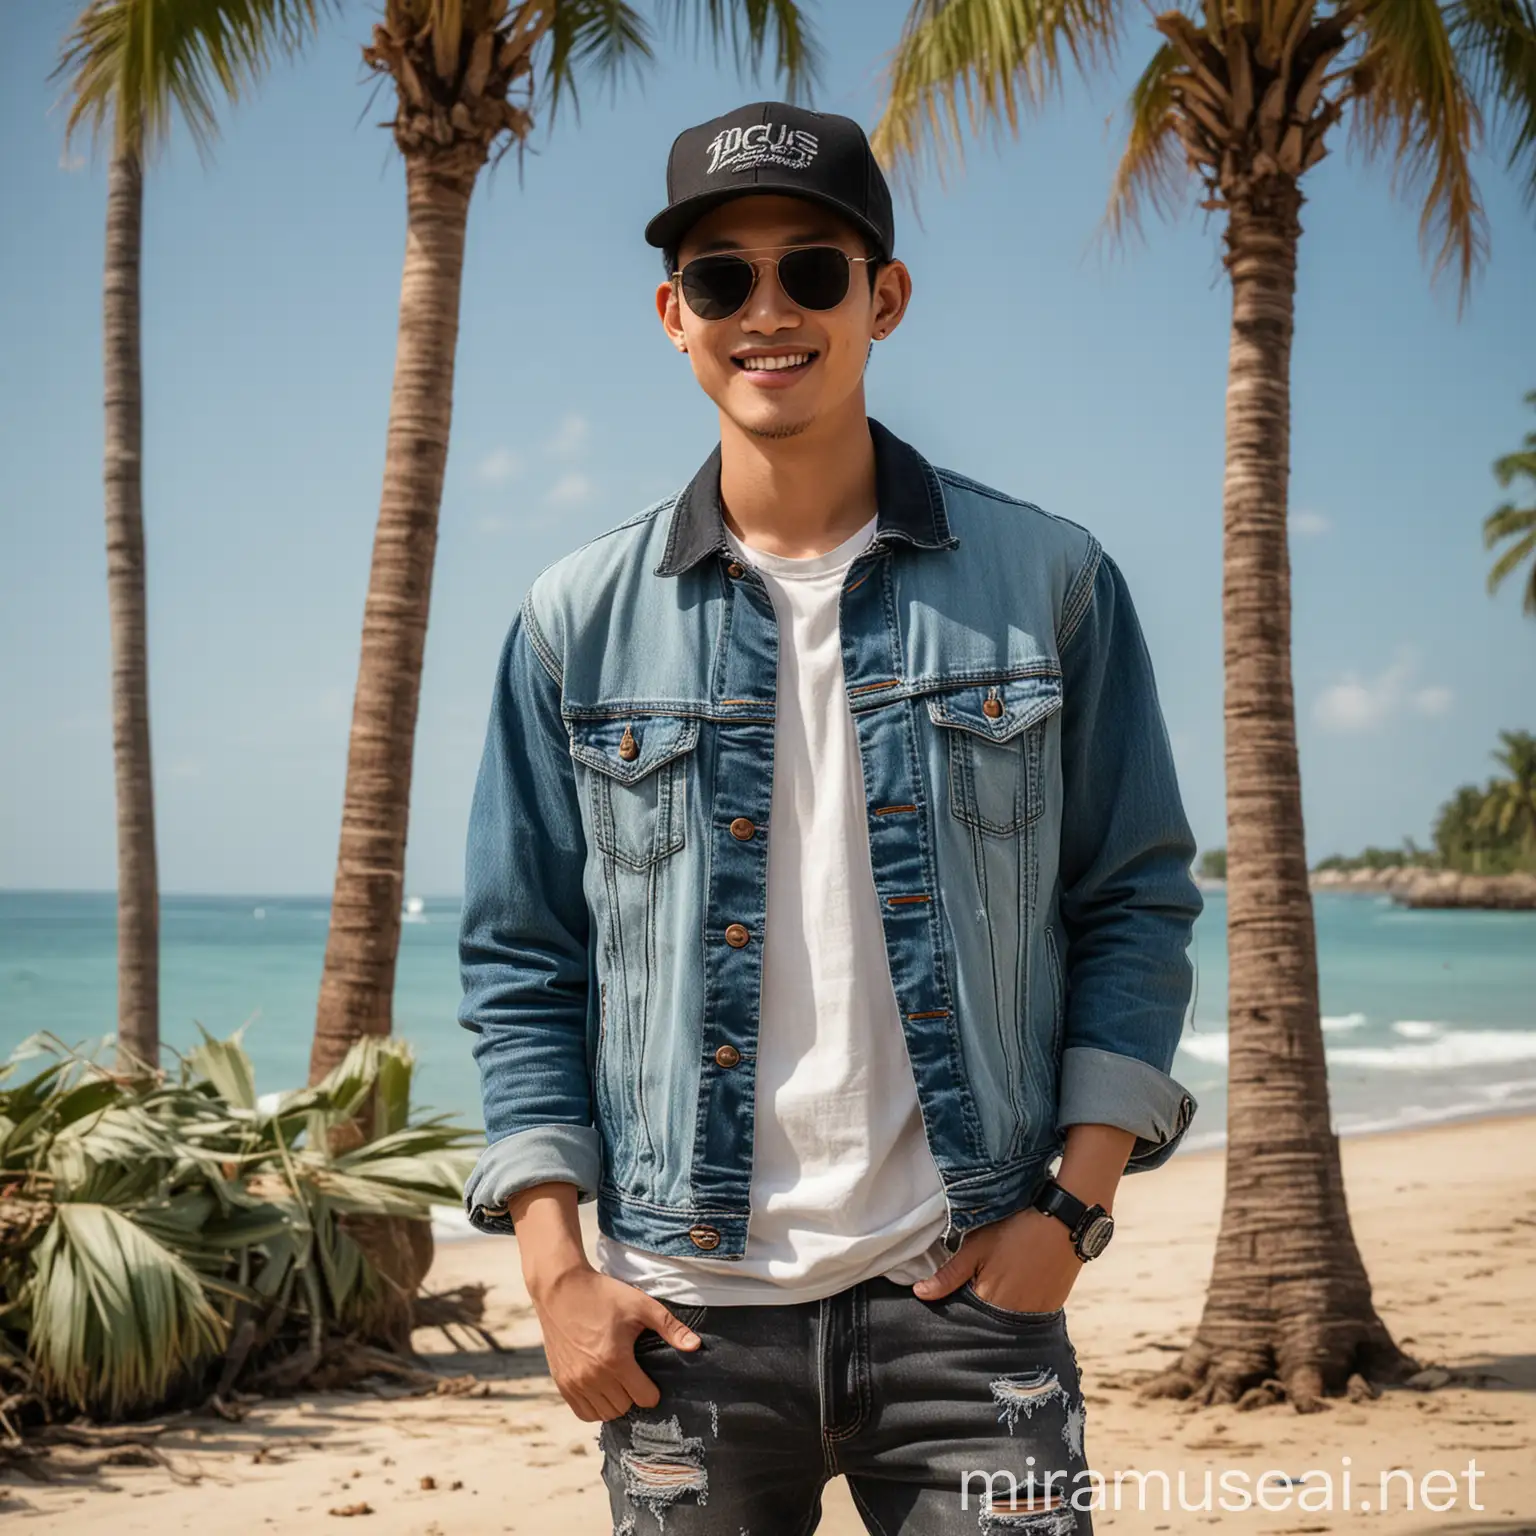 Nikon camera result: a somewhat thin Asian man smiles wearing a black baseball cap, black locus sunglasses, light blue ripped jeans jacket, and jeans sneakers standing on the beach with coconut trees in the daytime, very detailed, very clear, high resolution.